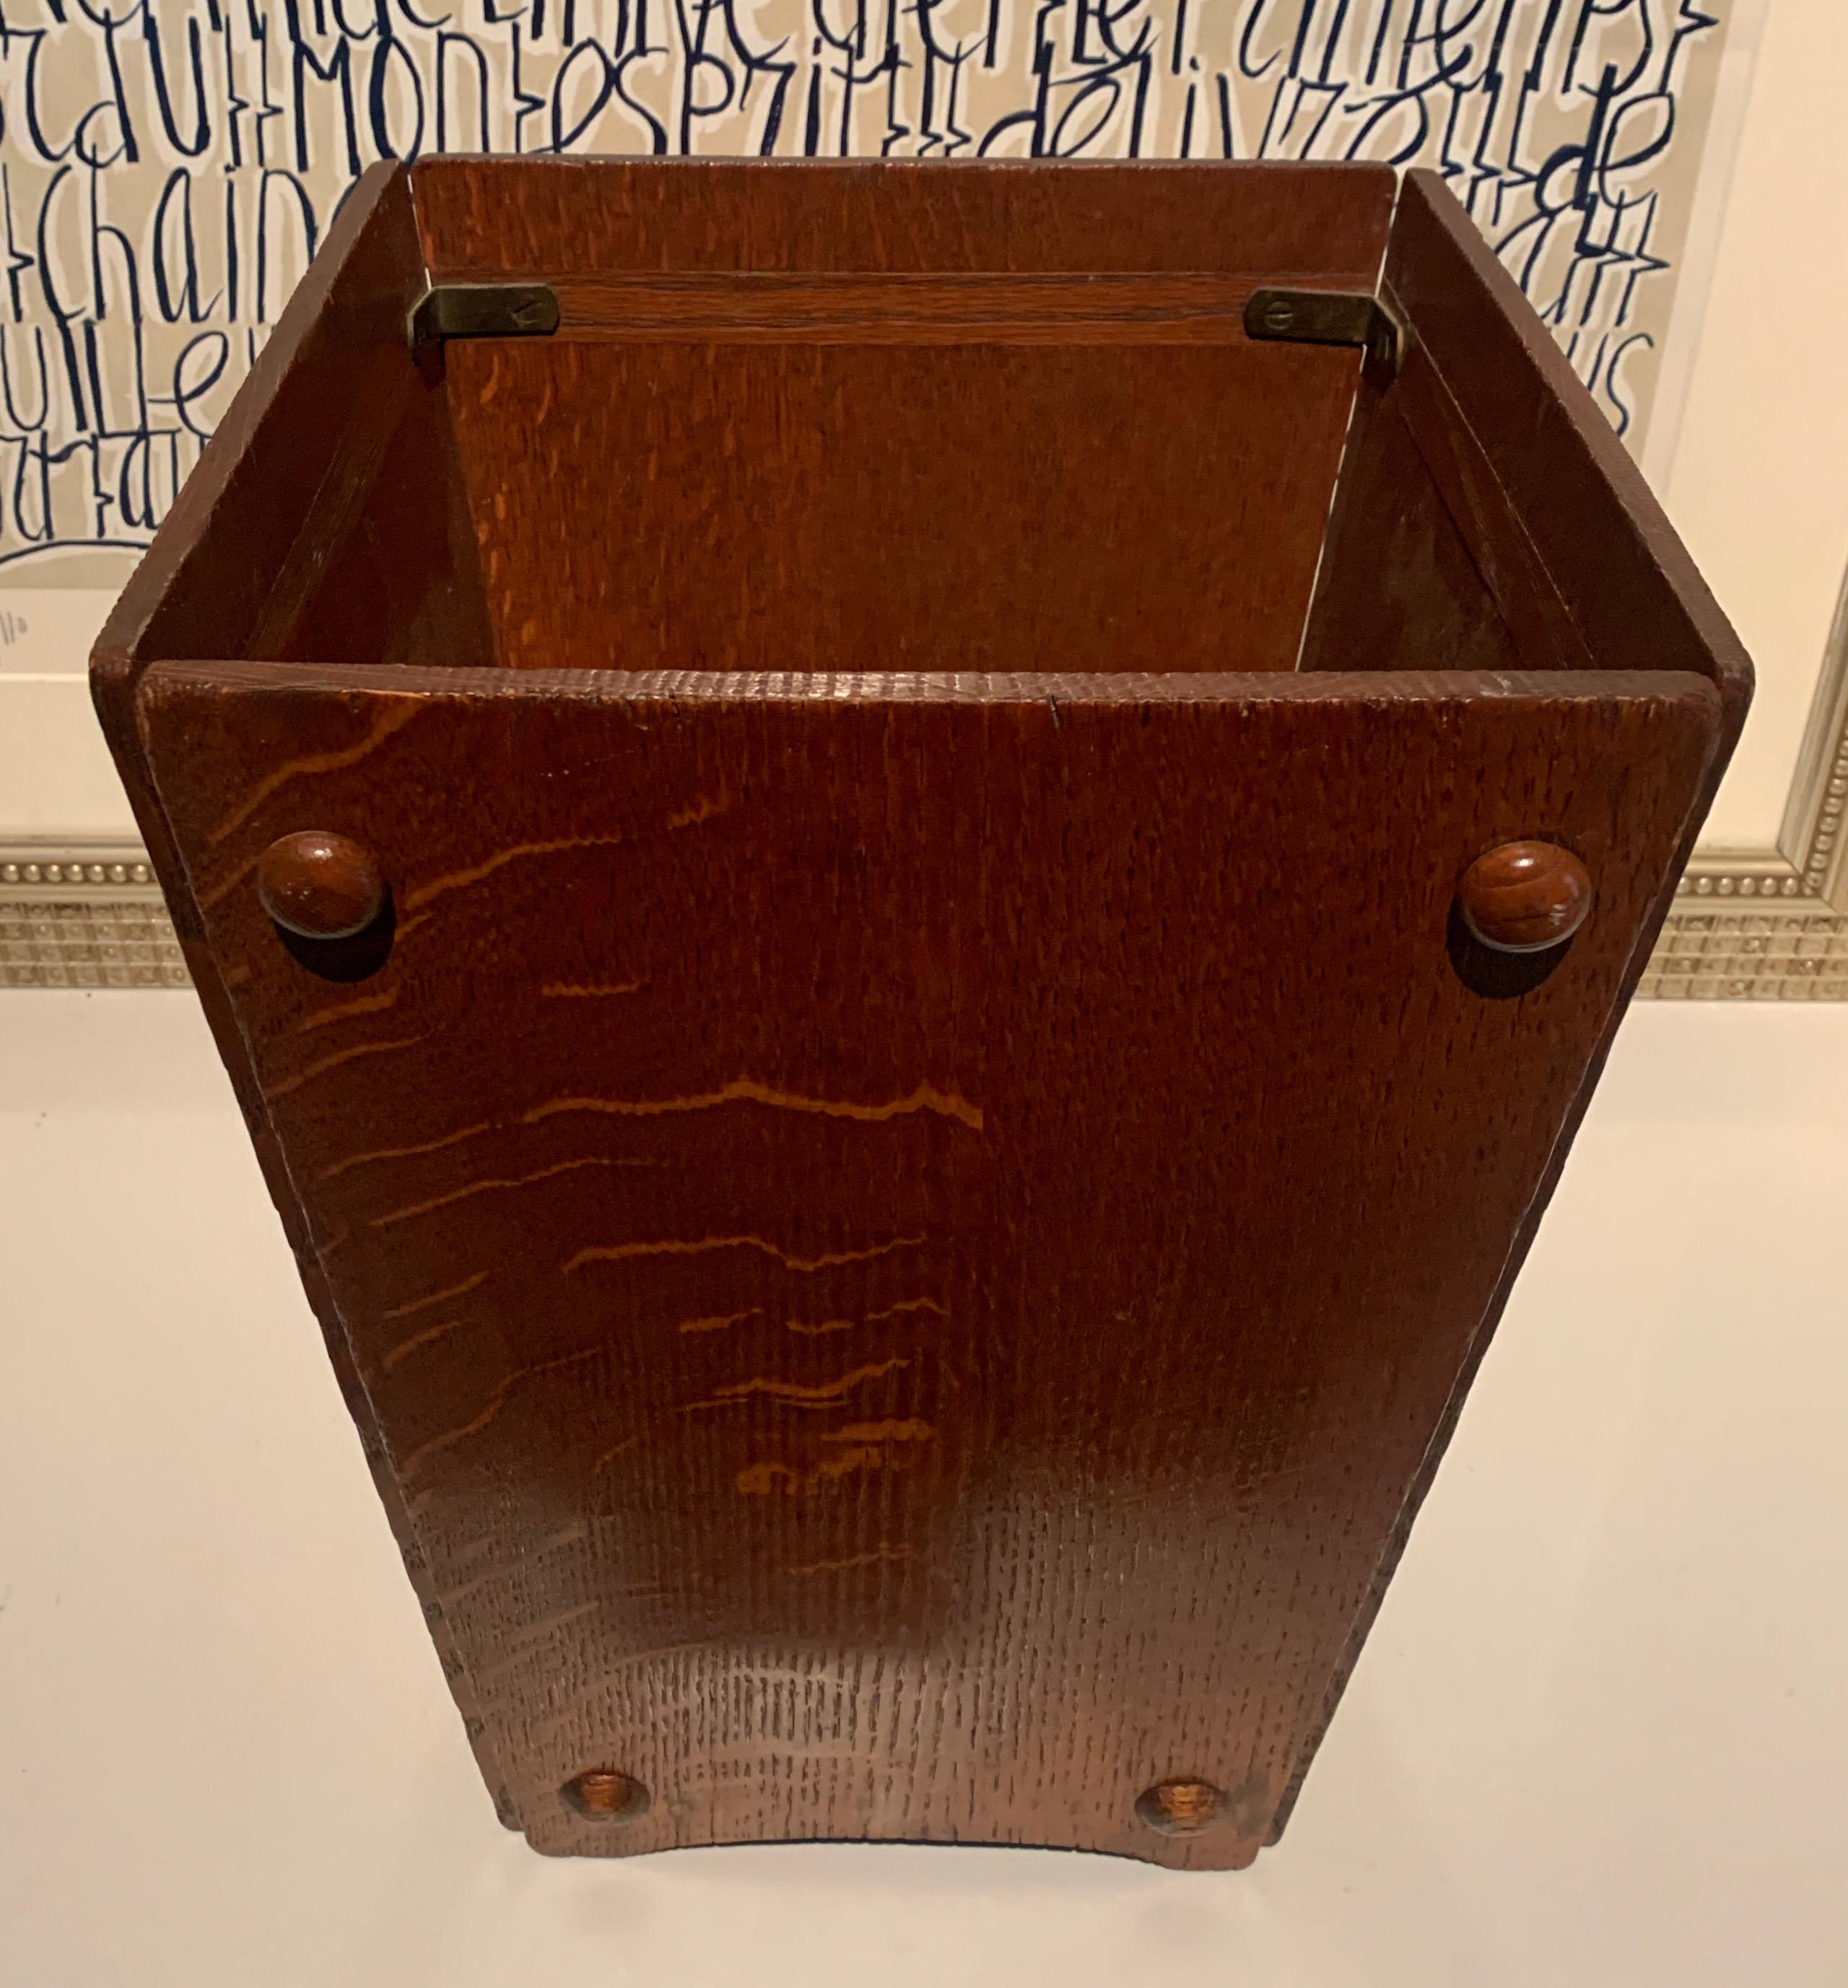 A sturdy and wonderfully aesthetic Arts & Crafts cerused oak waste can. The very simple panels of cerused Oak with a subtle arch at the base with four wooden pegs in each side give this piece a special architectural look that will compliment any